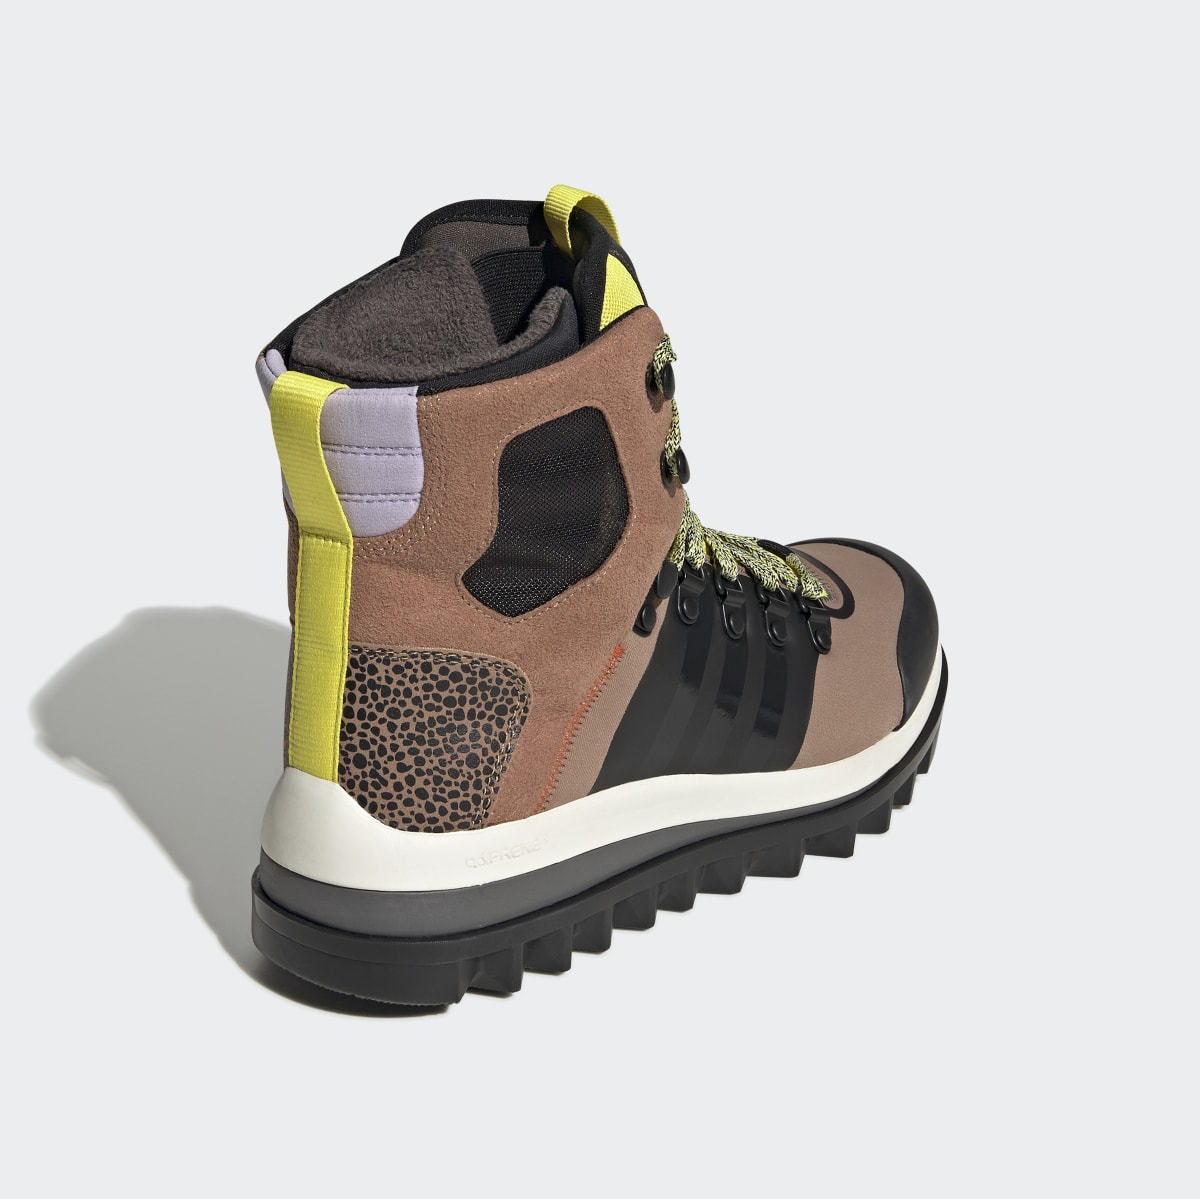 Adidas by Stella McCartney Eulampis Boots. 6